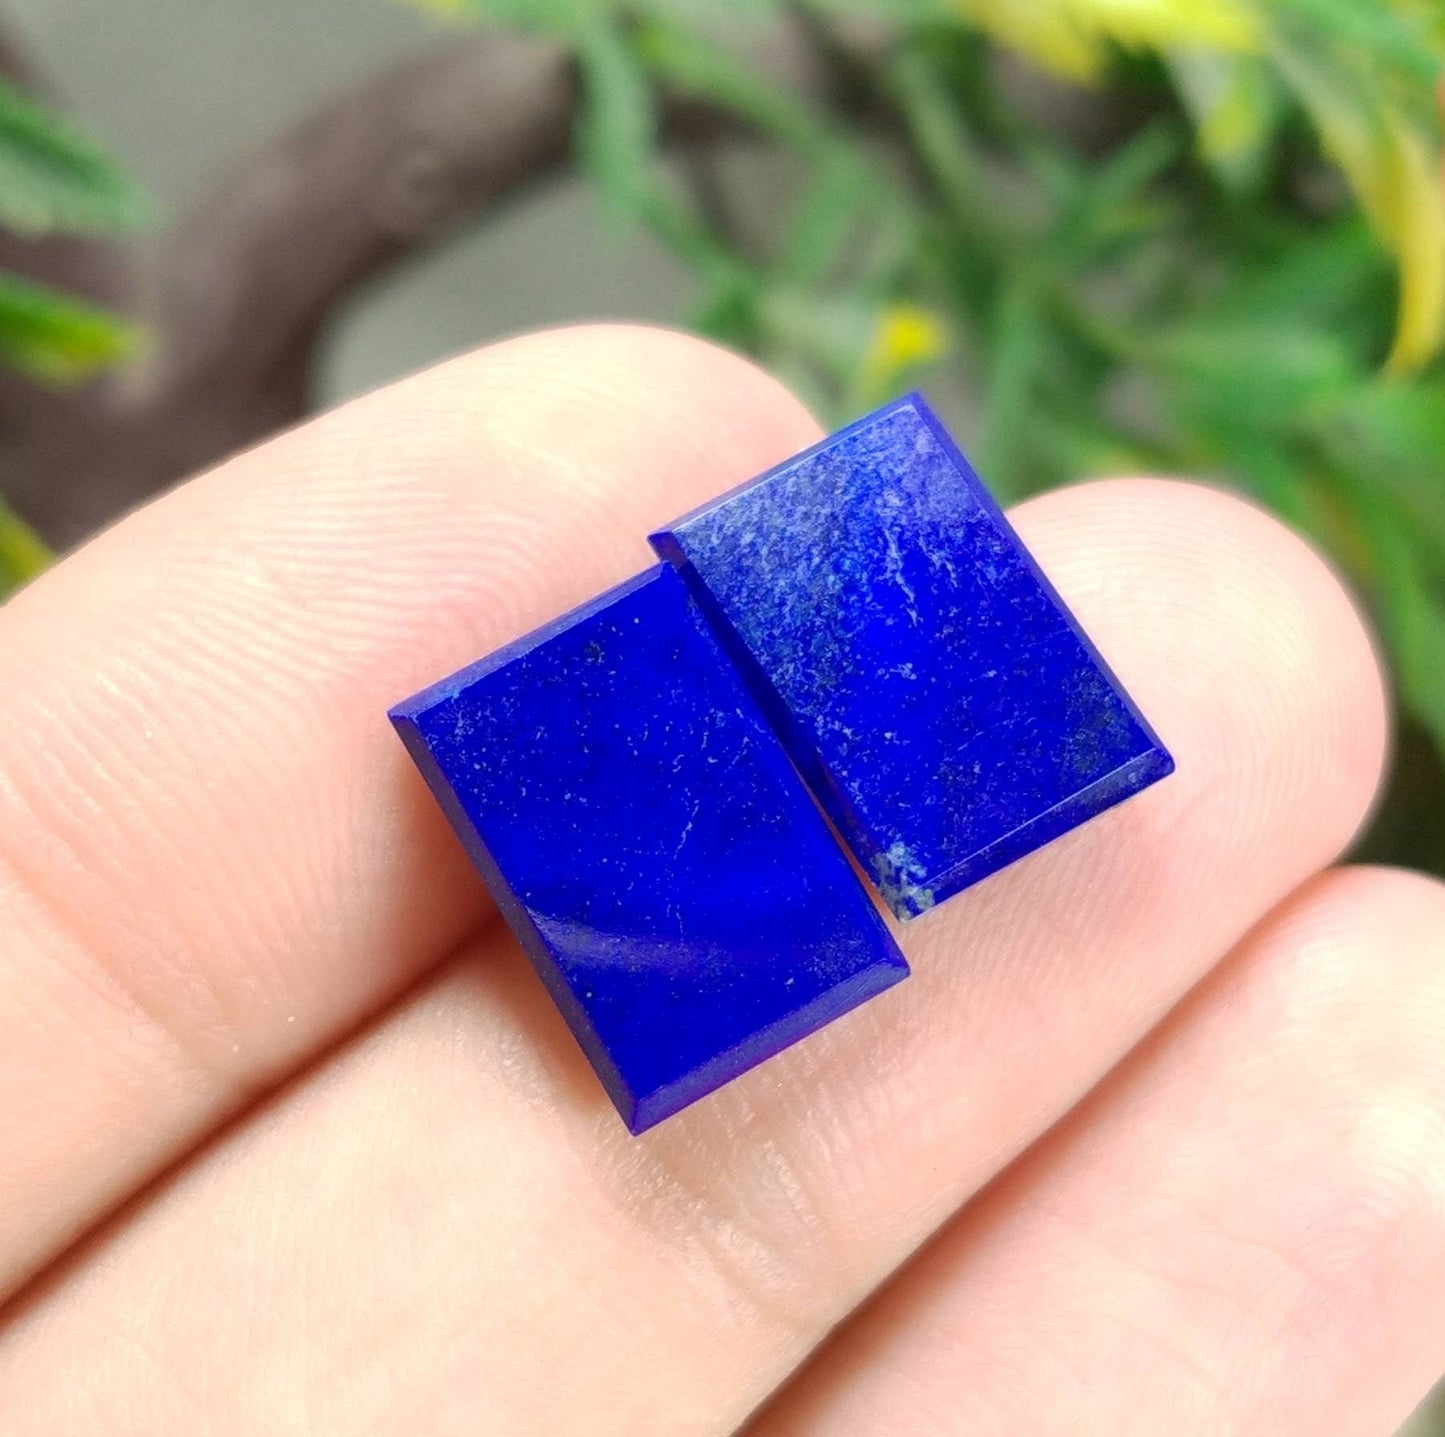 ARSAA GEMS AND MINERALSNatural fine quality beautiful 5 carat pair of lapis lazuli cabochons - Premium  from ARSAA GEMS AND MINERALS - Just $12.00! Shop now at ARSAA GEMS AND MINERALS